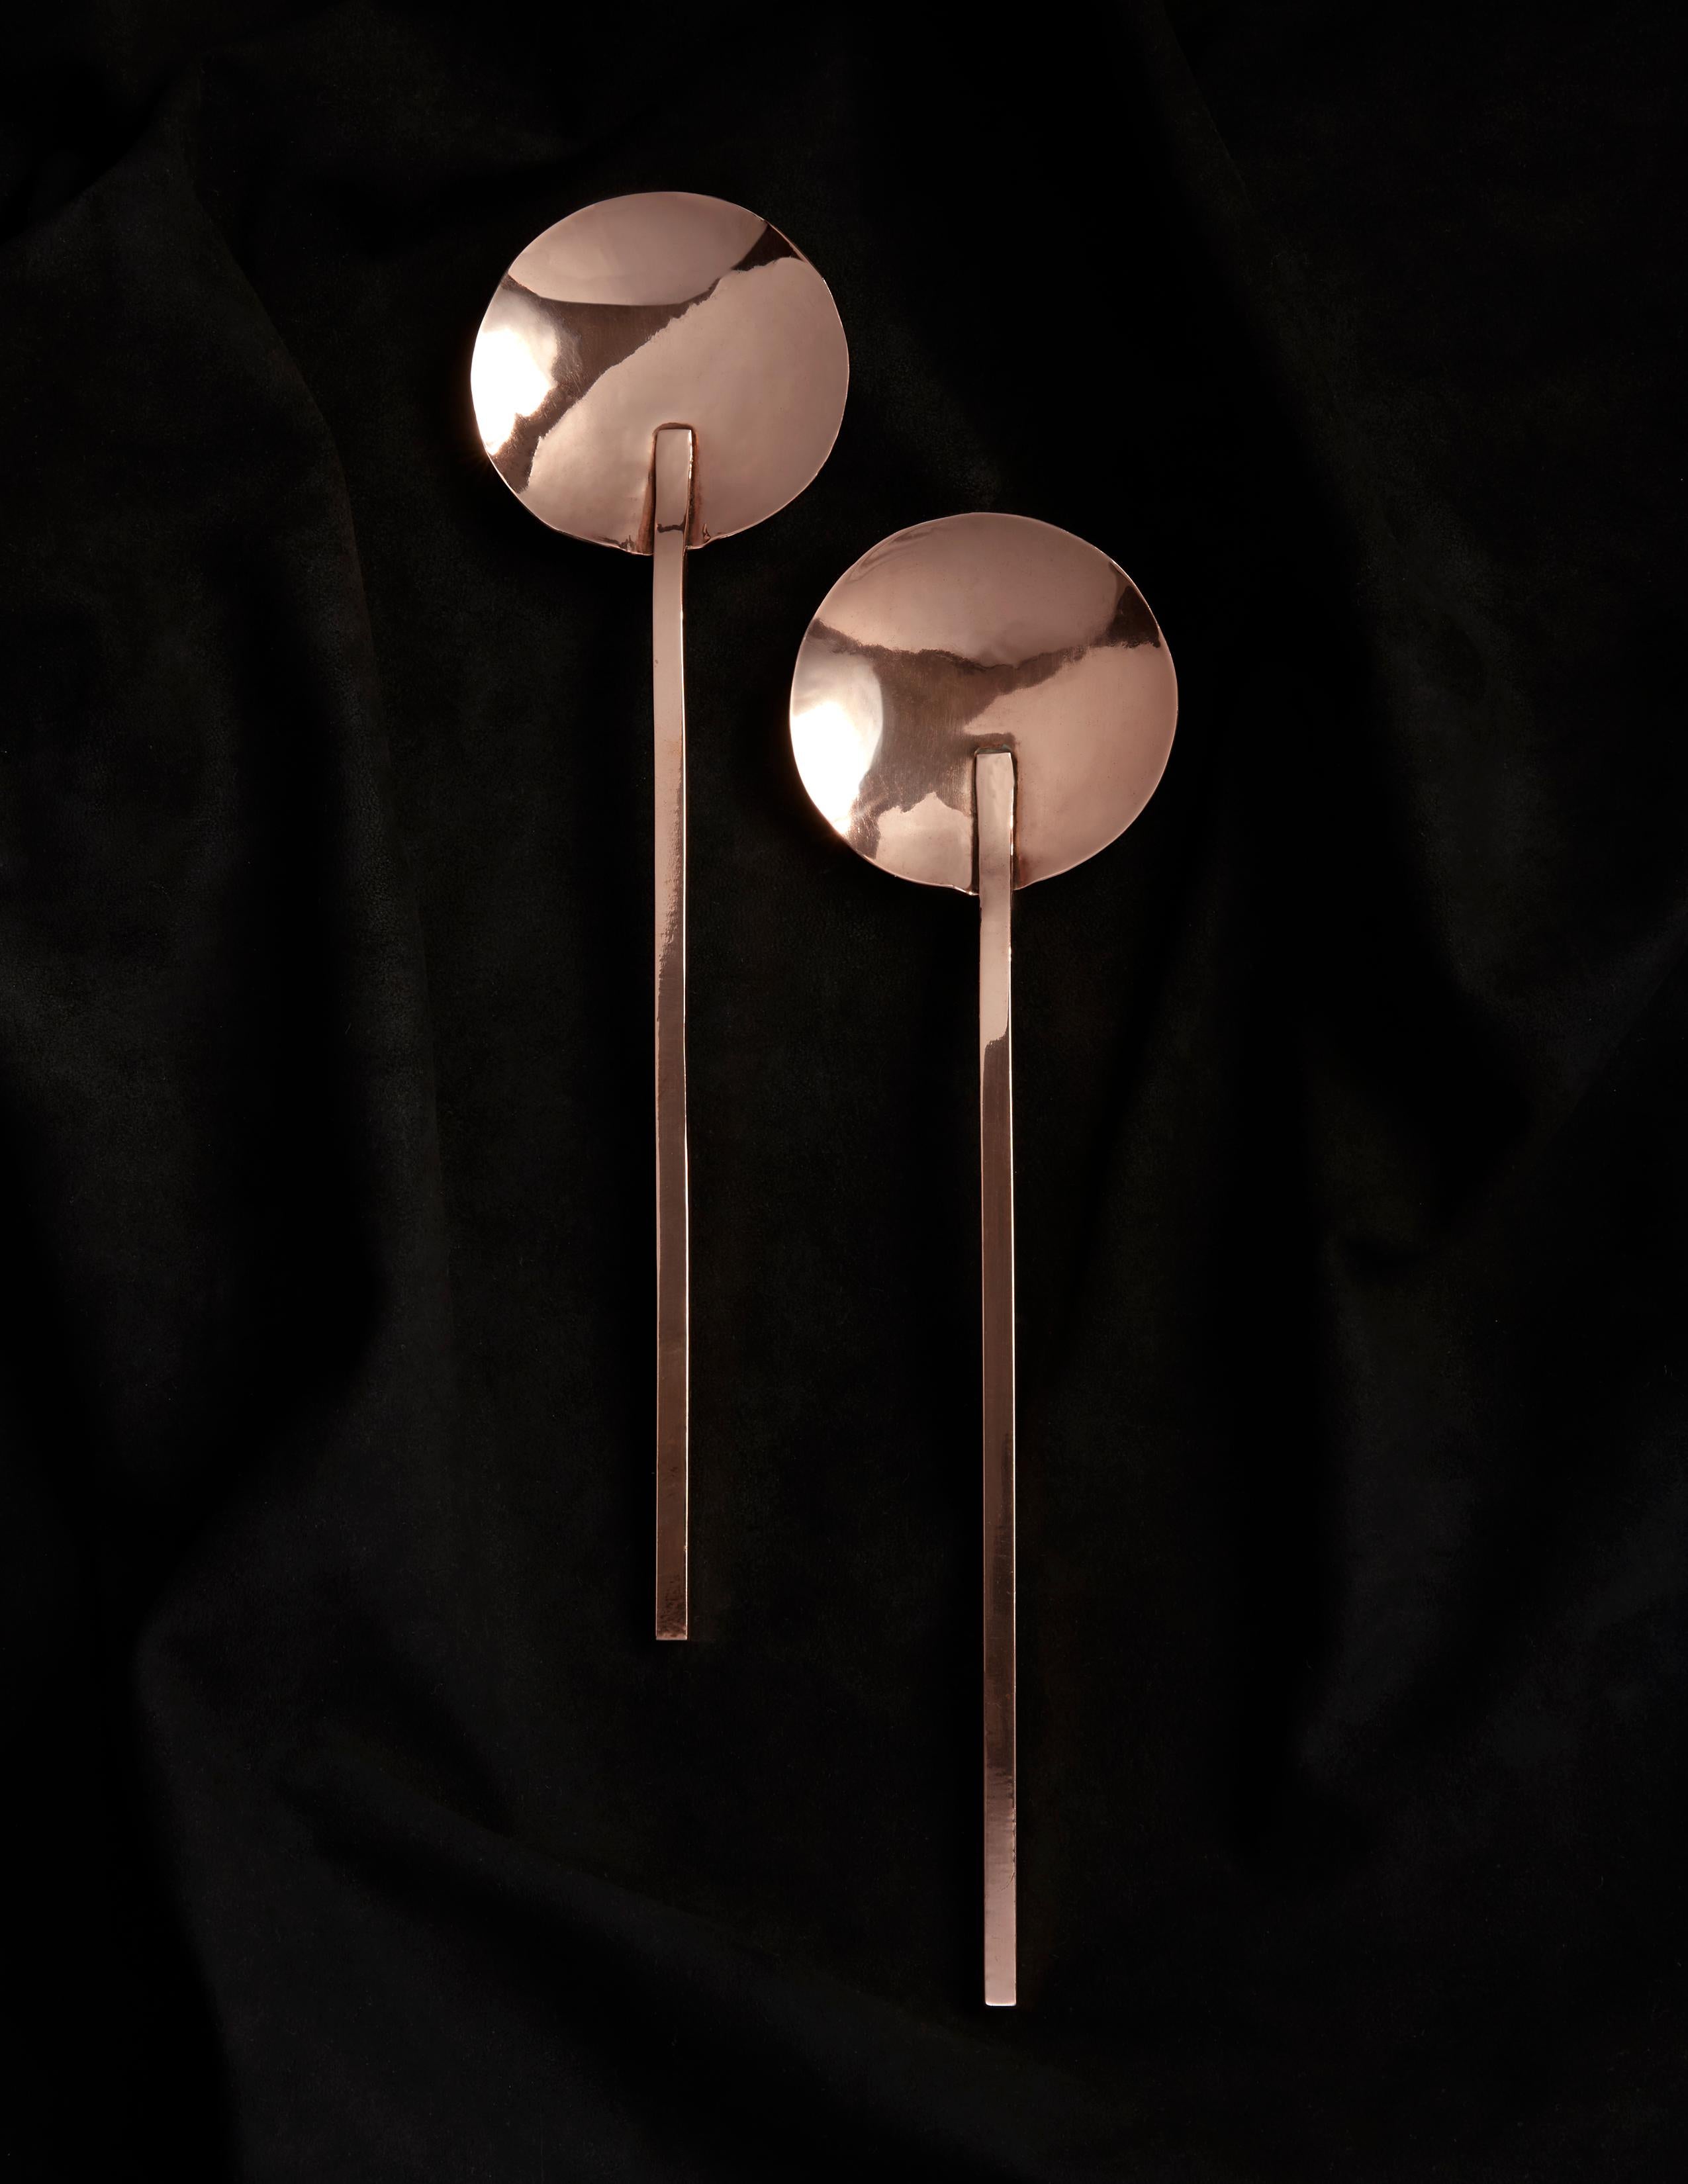 Two-piece set of modern high-polished copper serving spoons. Fabricated in rich copper and then finished by hand in his Brooklyn, NY studio, these pieces are the creation of silversmith and jewelry designer Heath Wagoner under HW. Studio. Designed